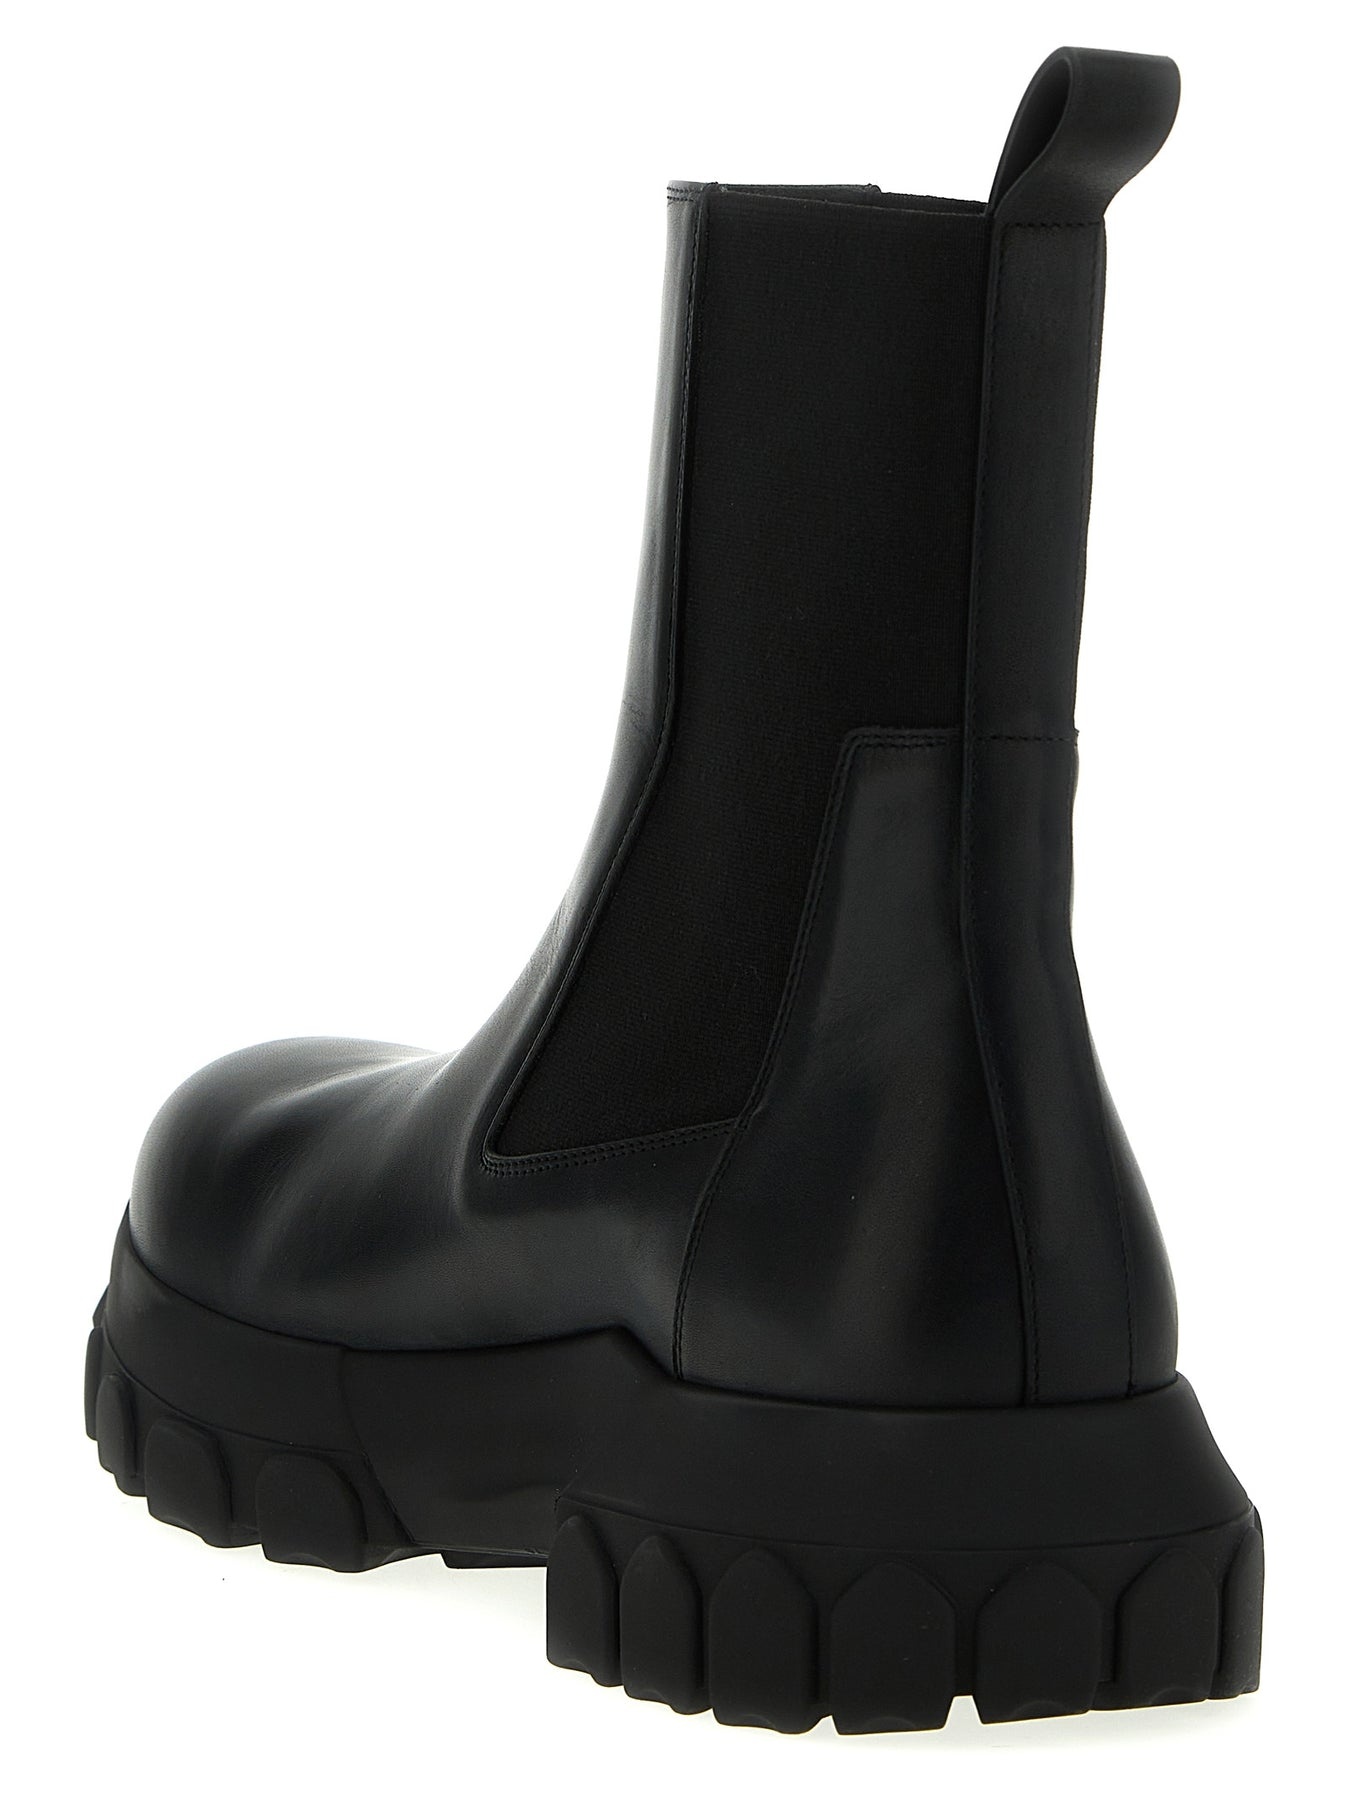 Beatle Bozo Tractor Boots, Ankle Boots Black - 3